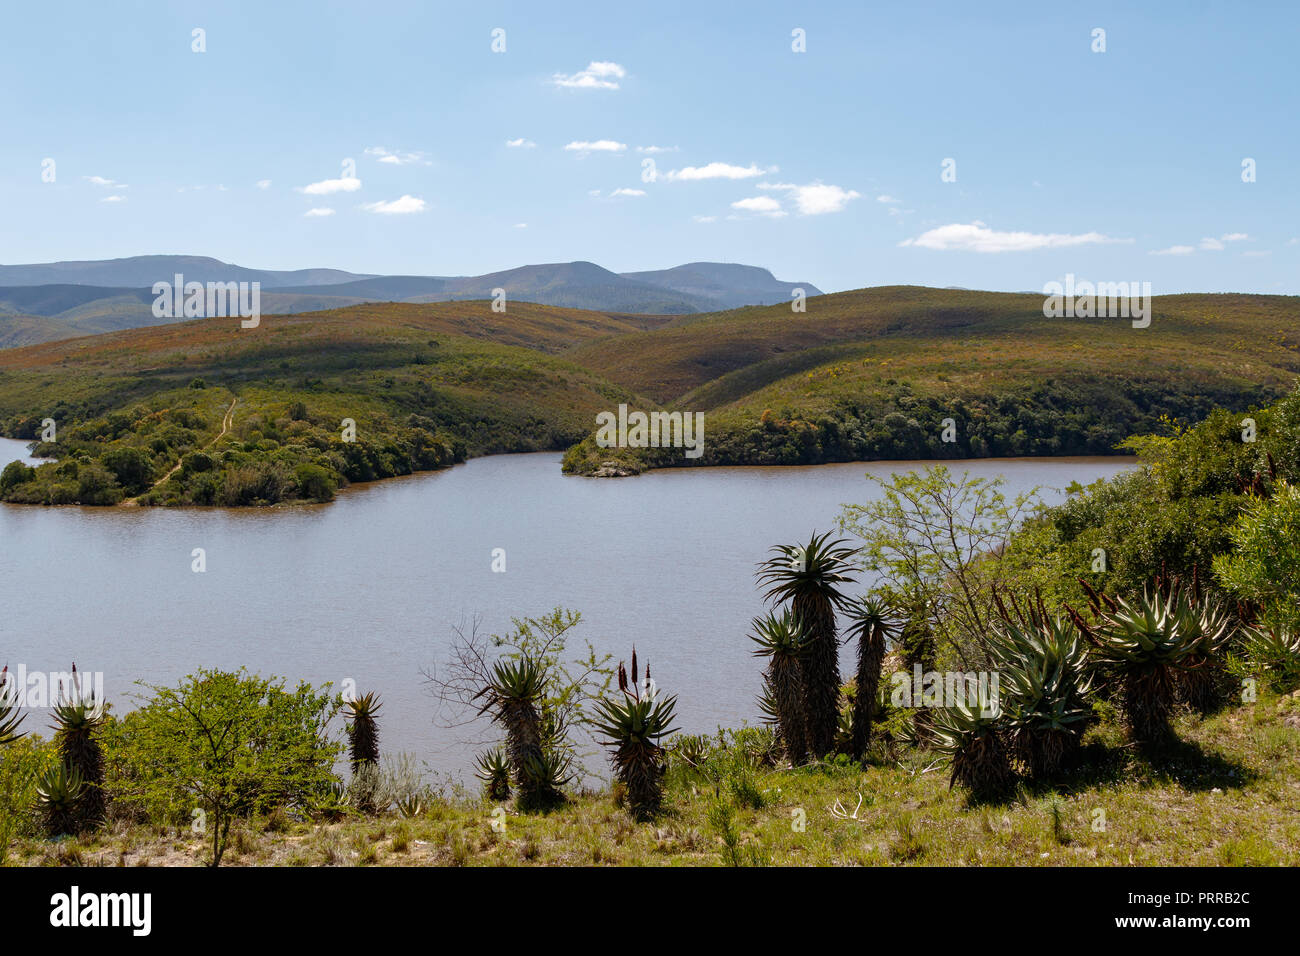 The dam with bushes in the foreground and mountains in the background Stock Photo